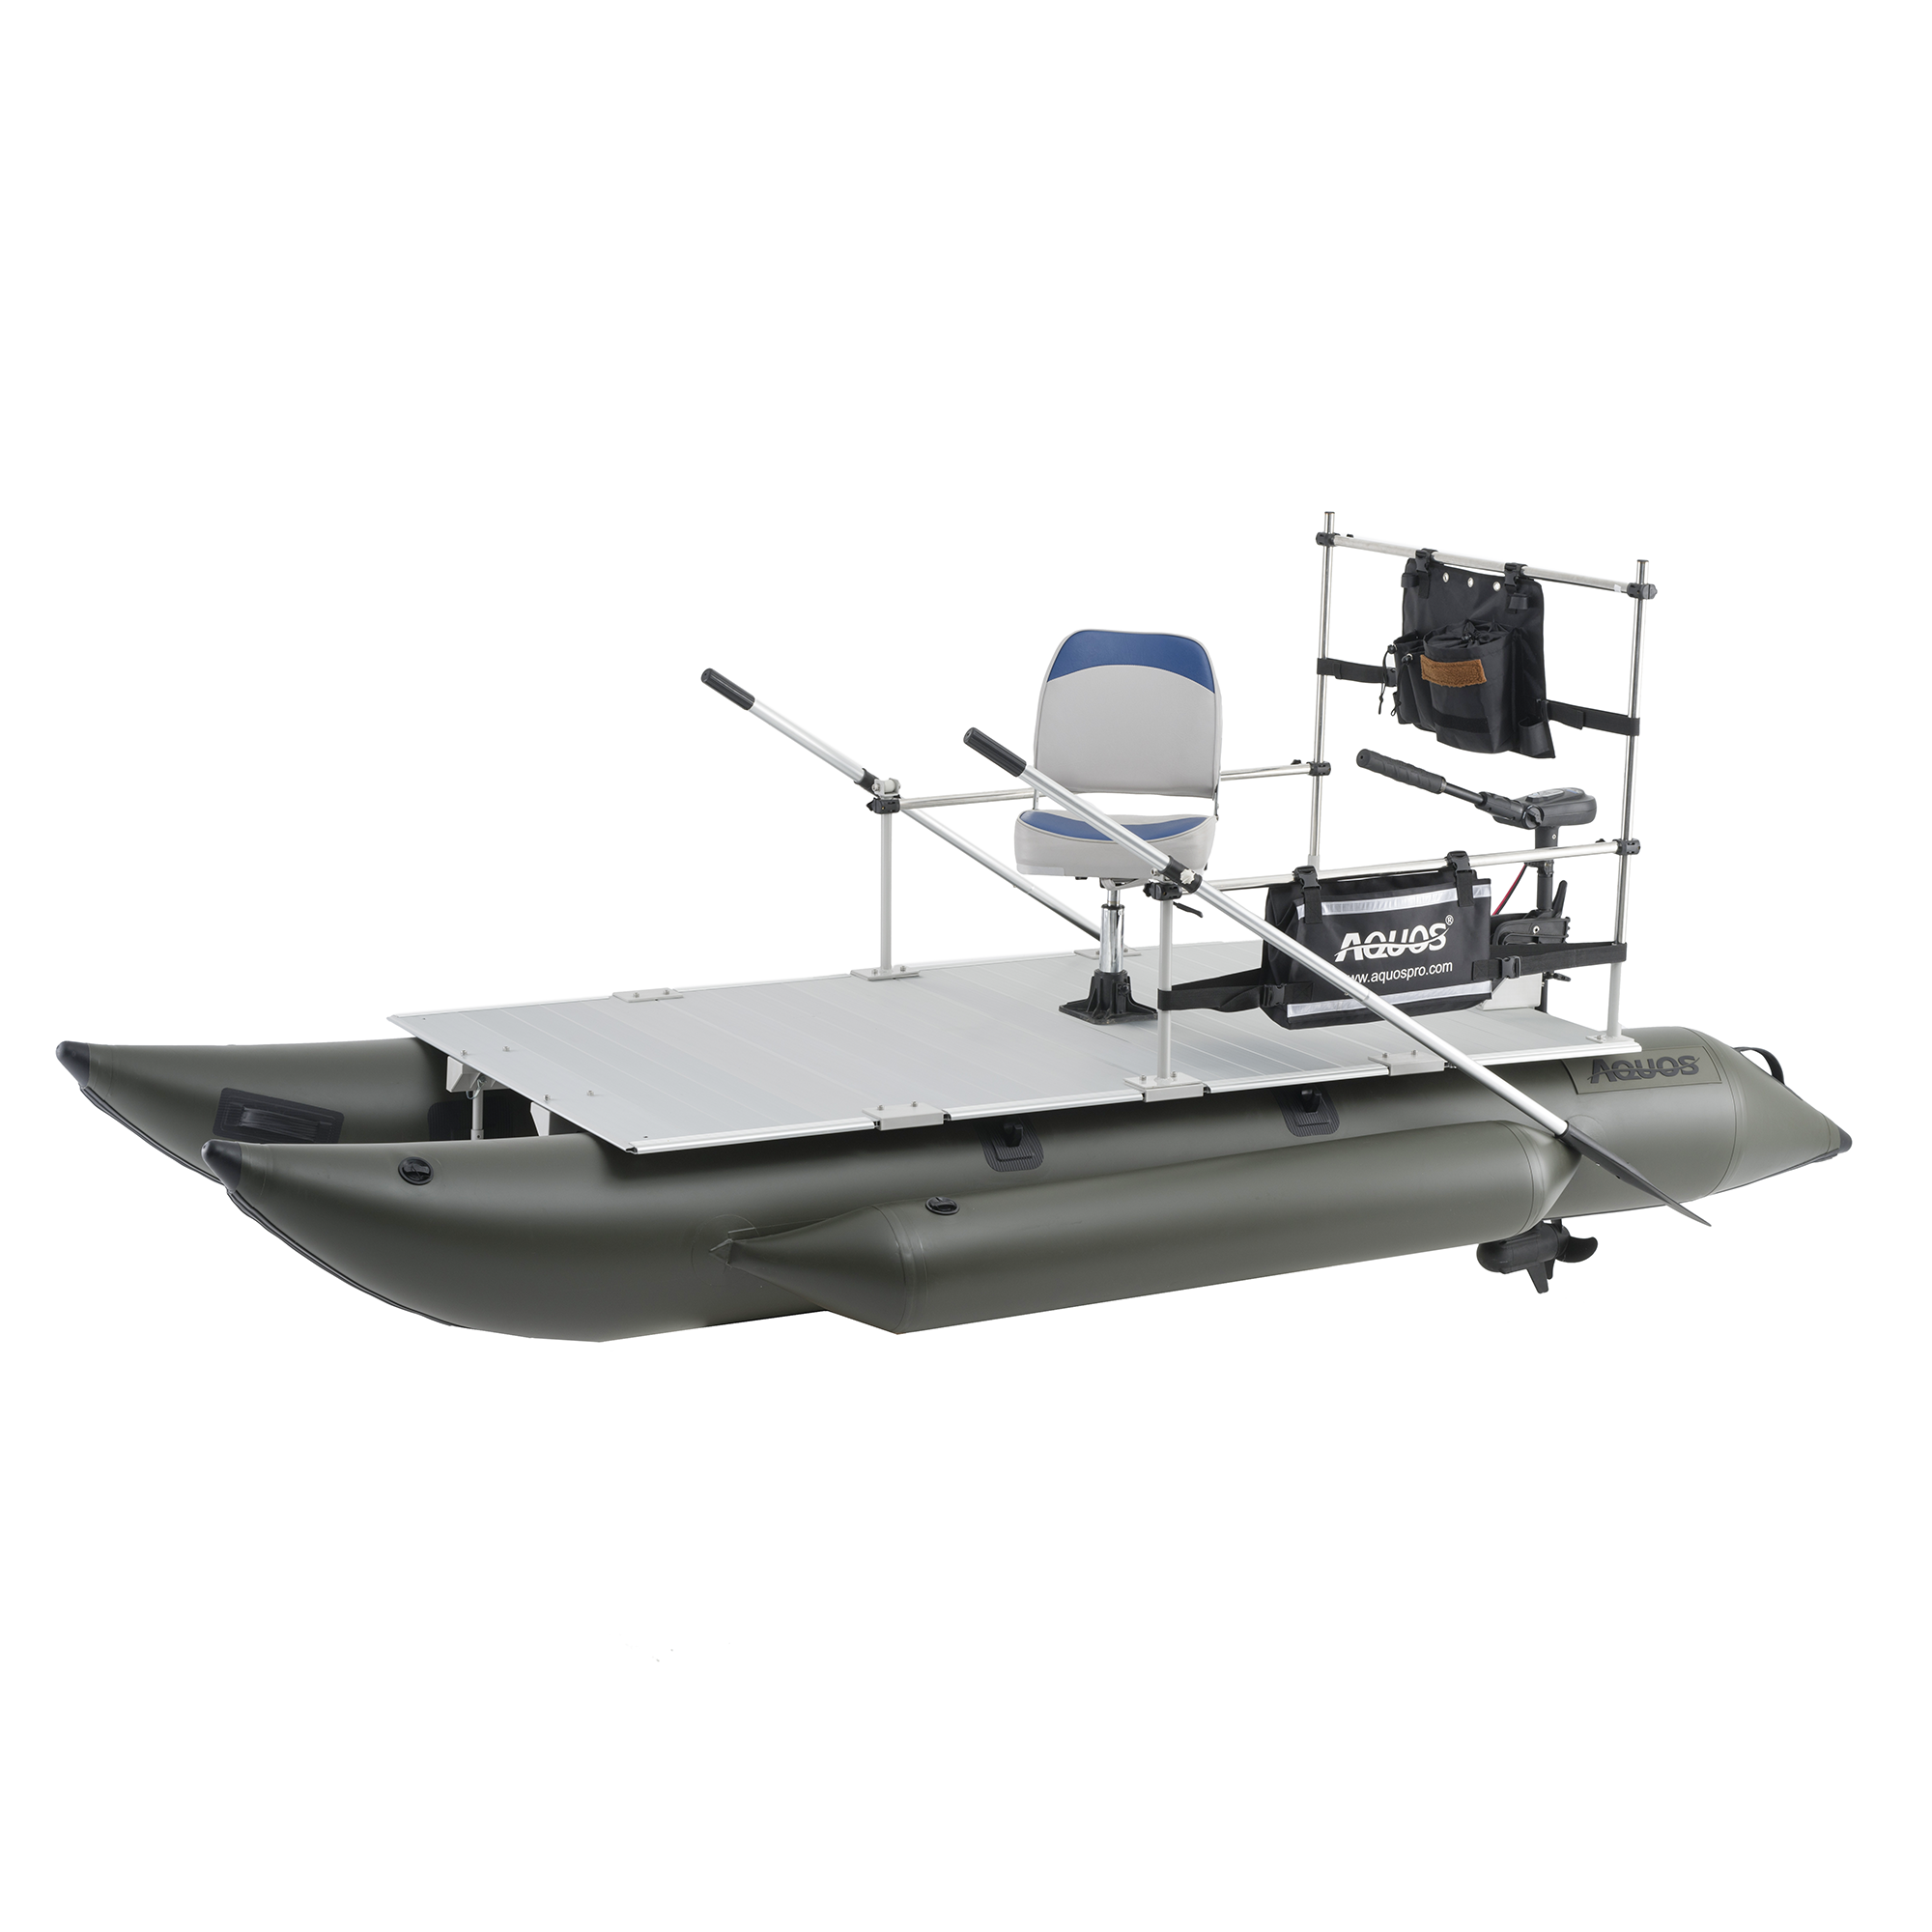 AQUOS New Heavy-Duty for Two Series 12.5 ft Inflatable Pontoon Boat with Haswing 24V 85lbs Transom Hand Control Trolling Motor